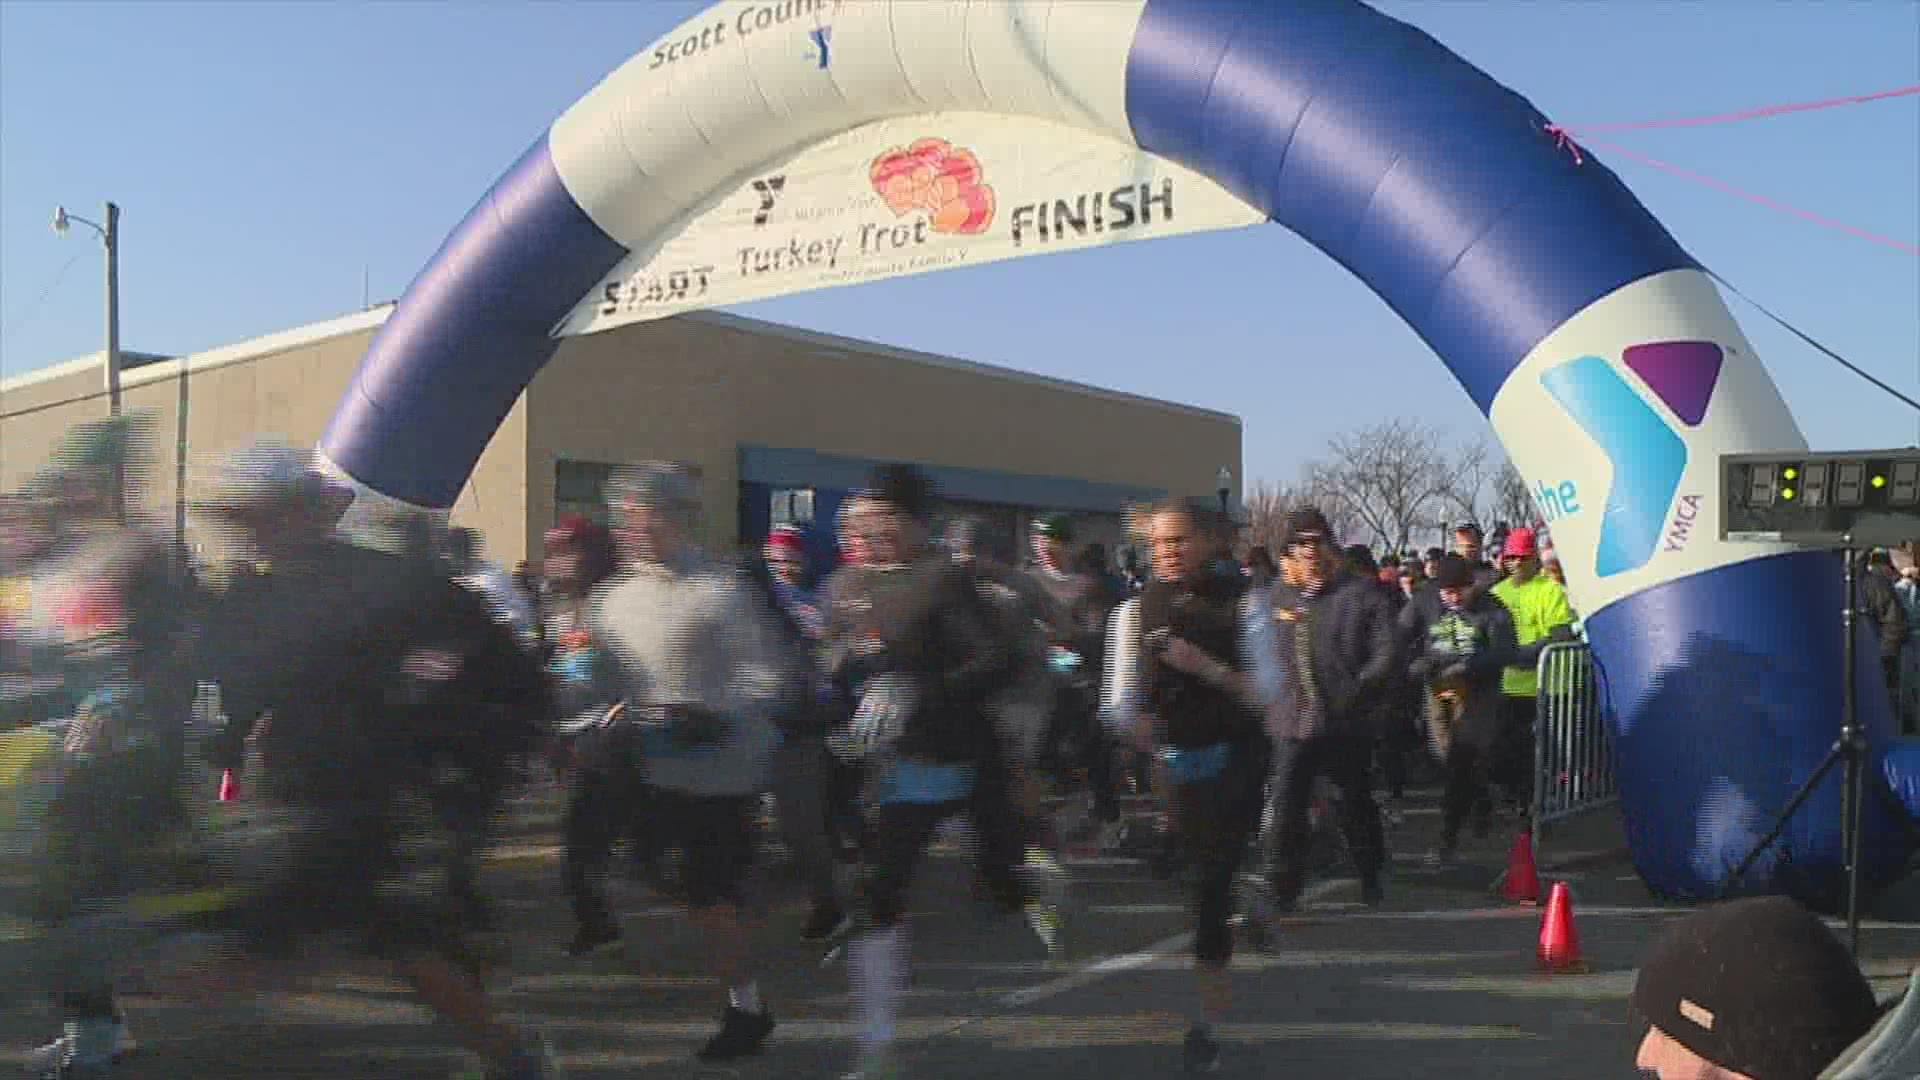 Initially the Turkey Trot was going to be held in-person but given a spike in cases, the event has moved virtually.